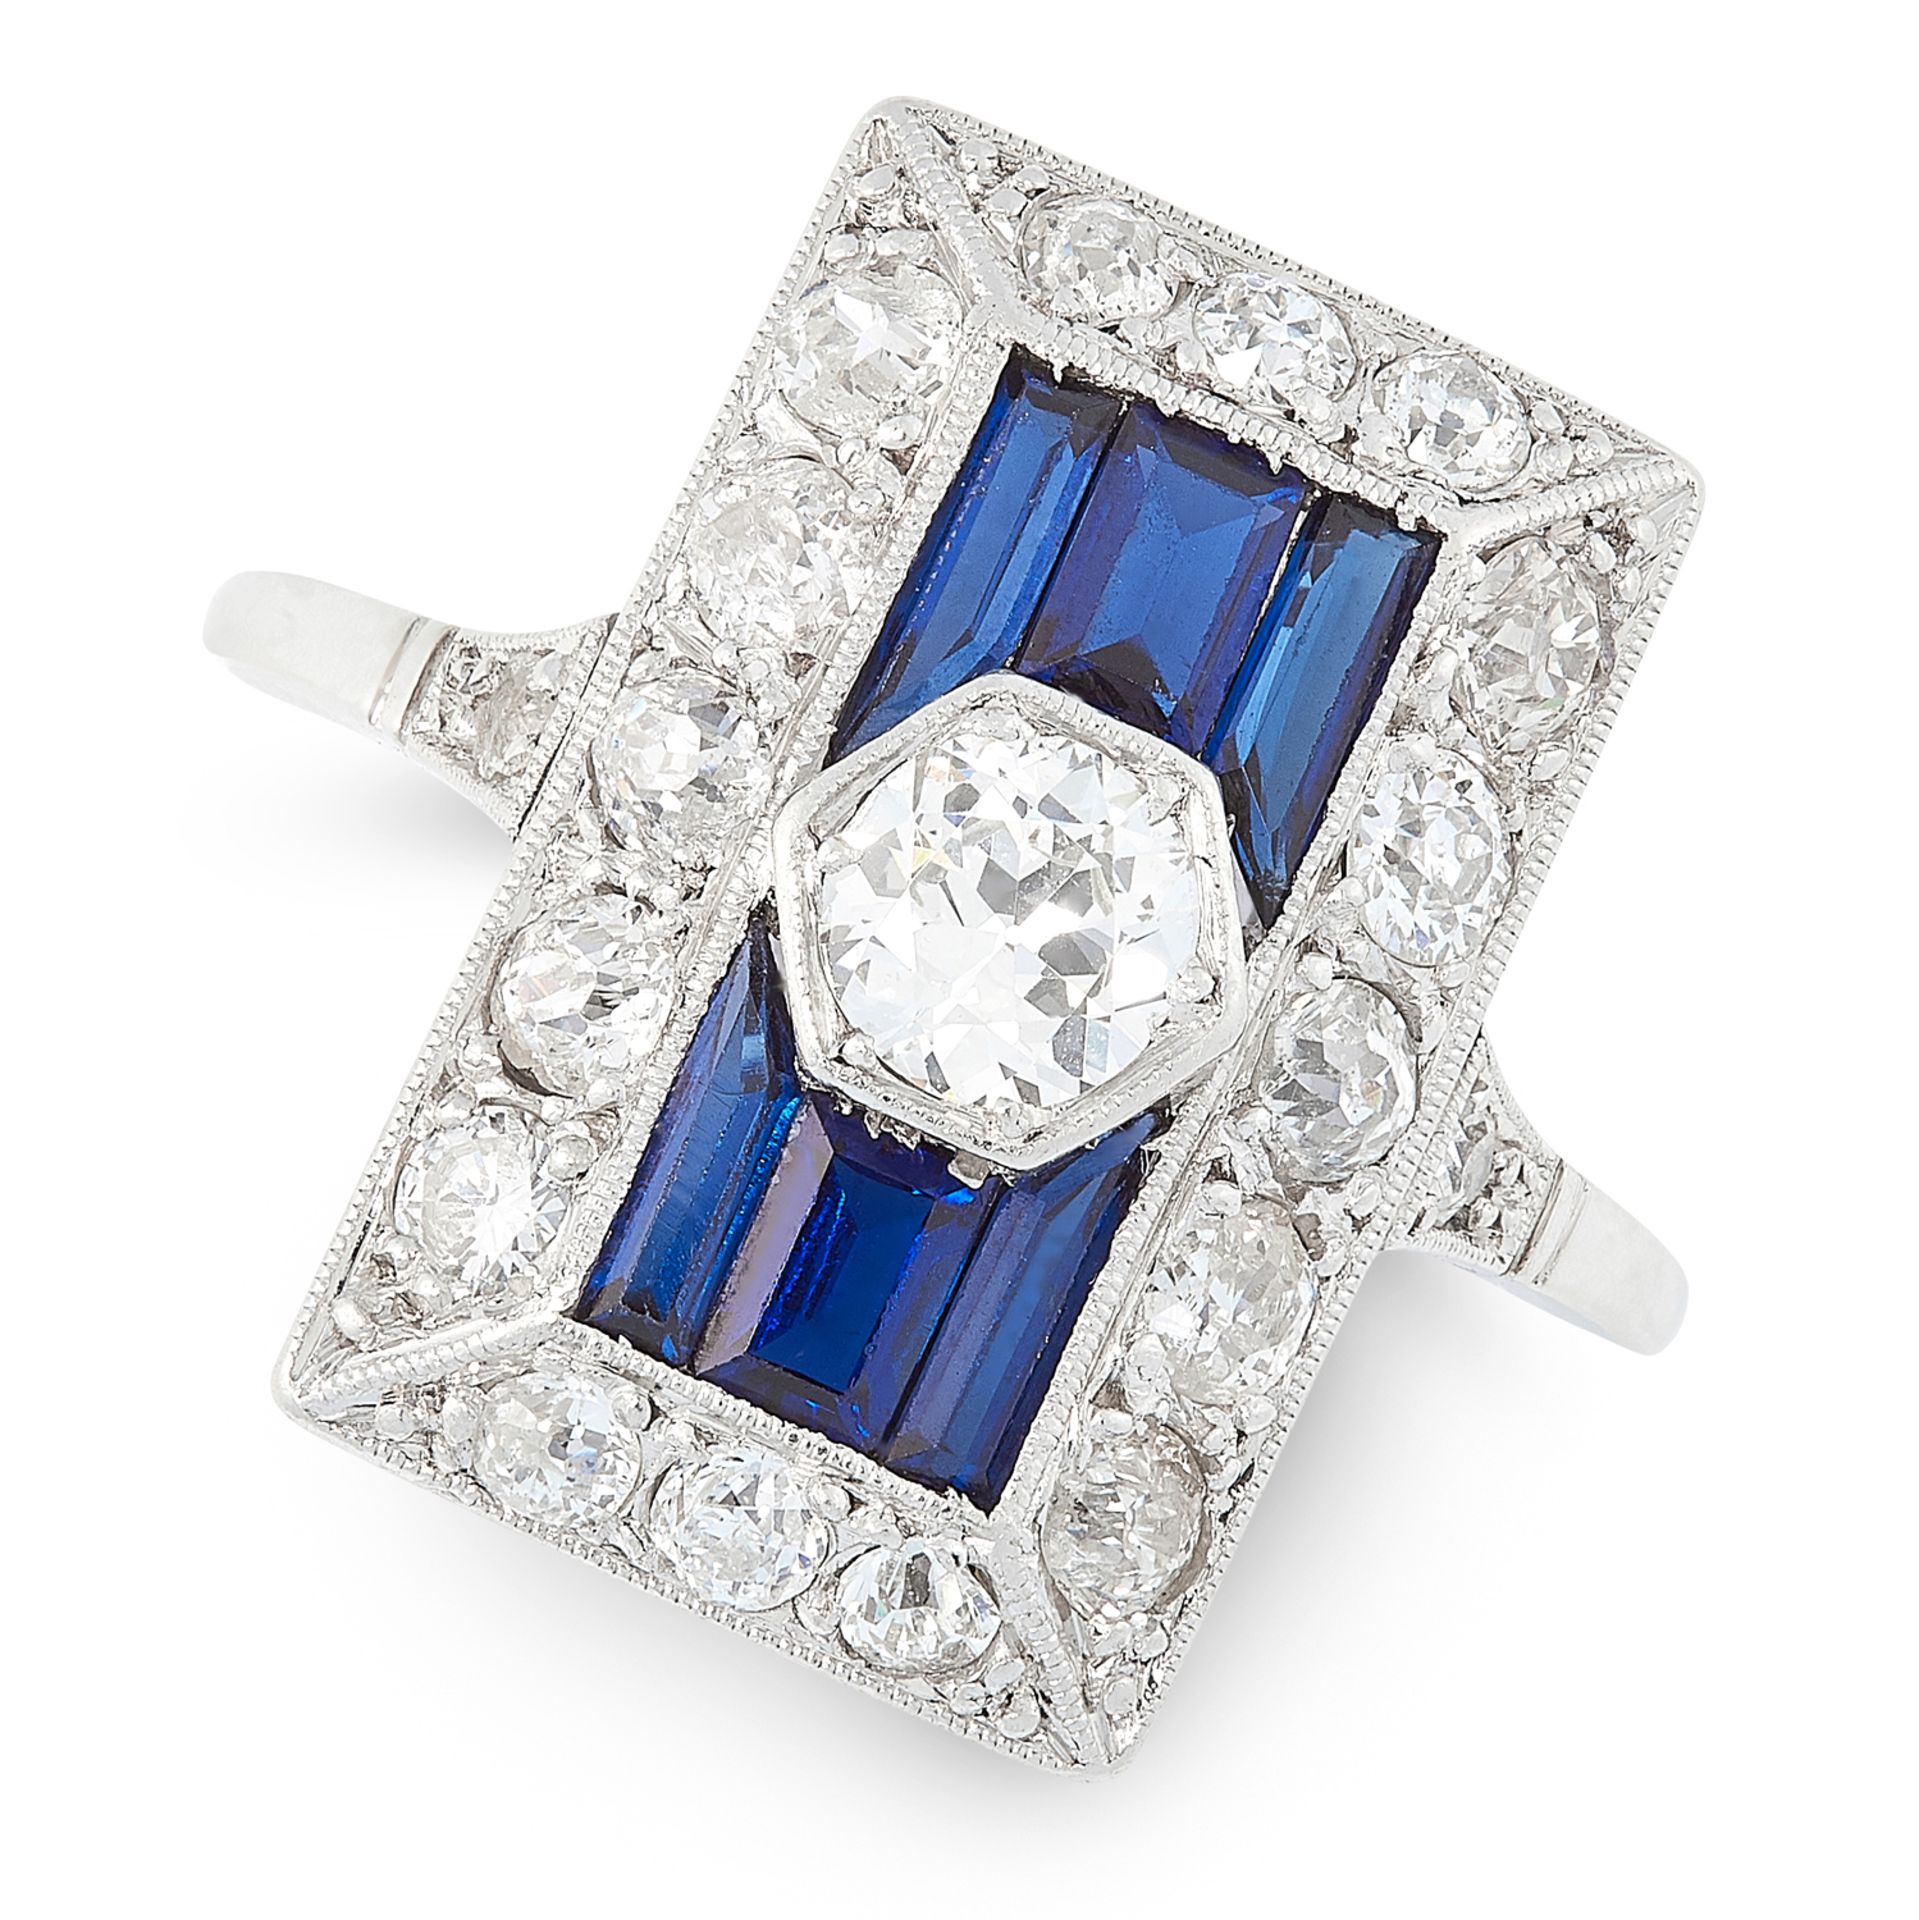 AN ART DECO DIAMOND AND SAPPHIRE RING, EARLY 20TH CENTURY set with an old cut diamond of 0.45 carats